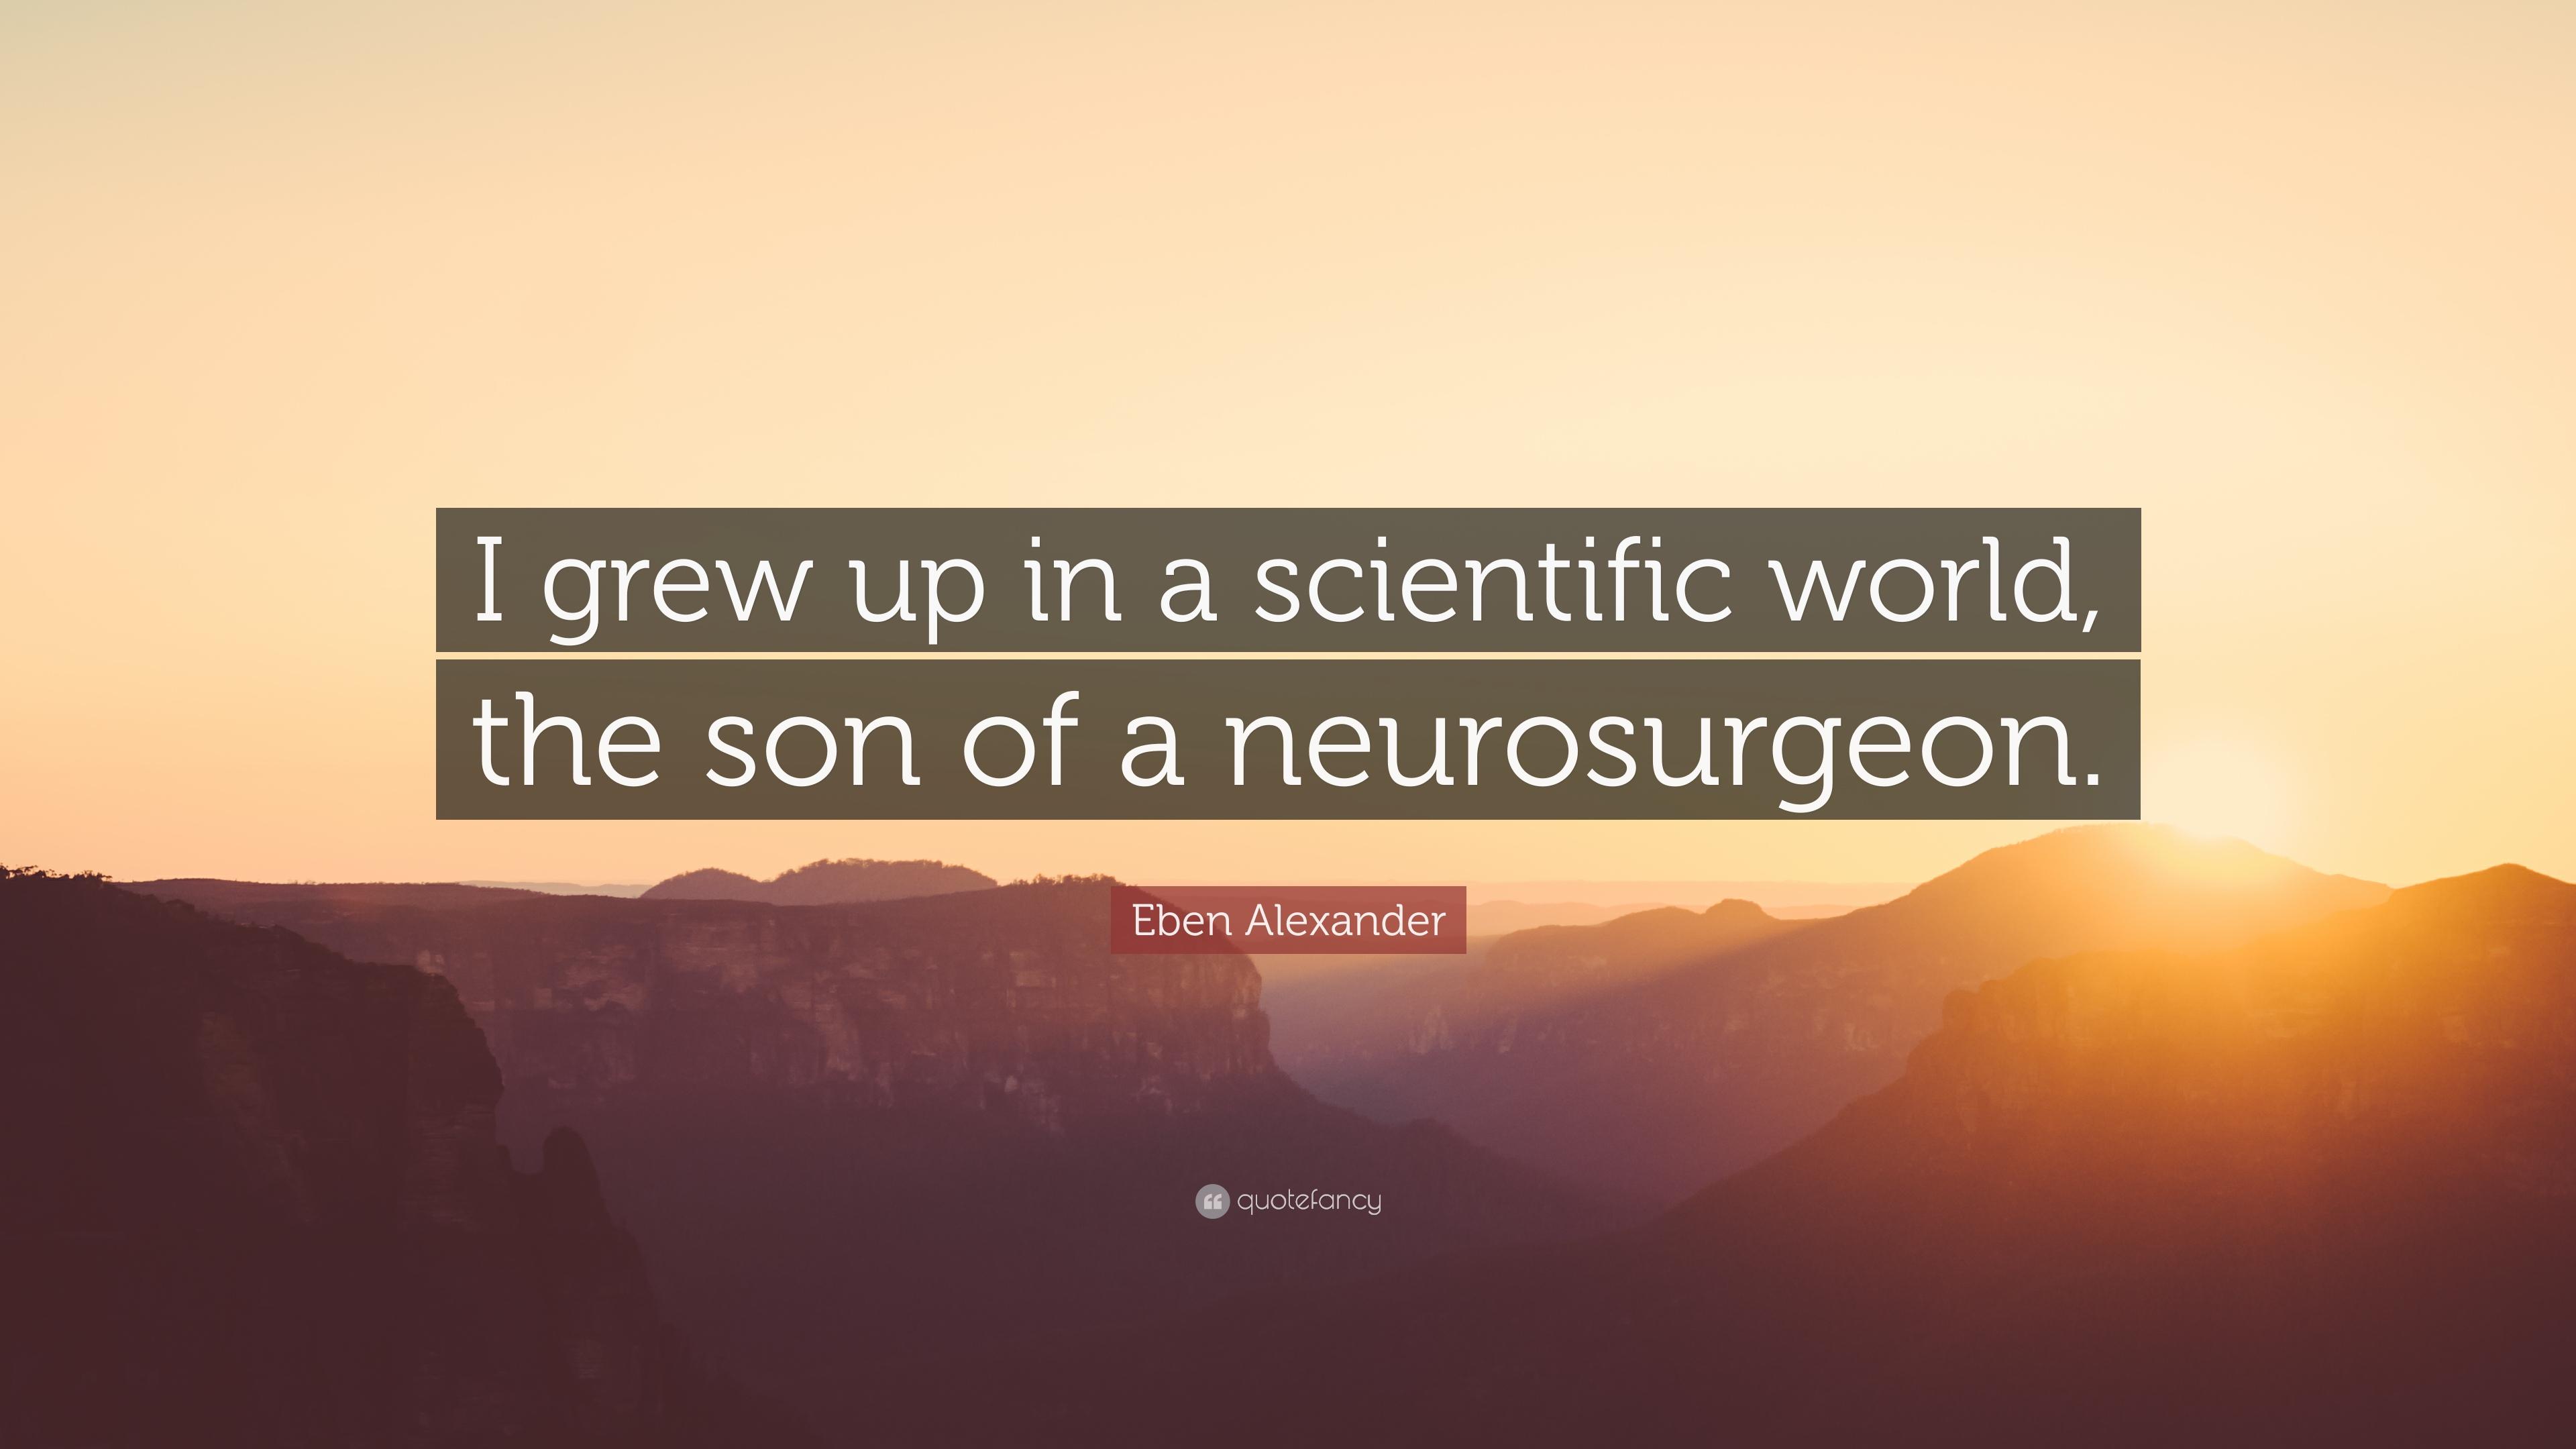 Eben Alexander Quote: “I grew up in a scientific world, the son of a